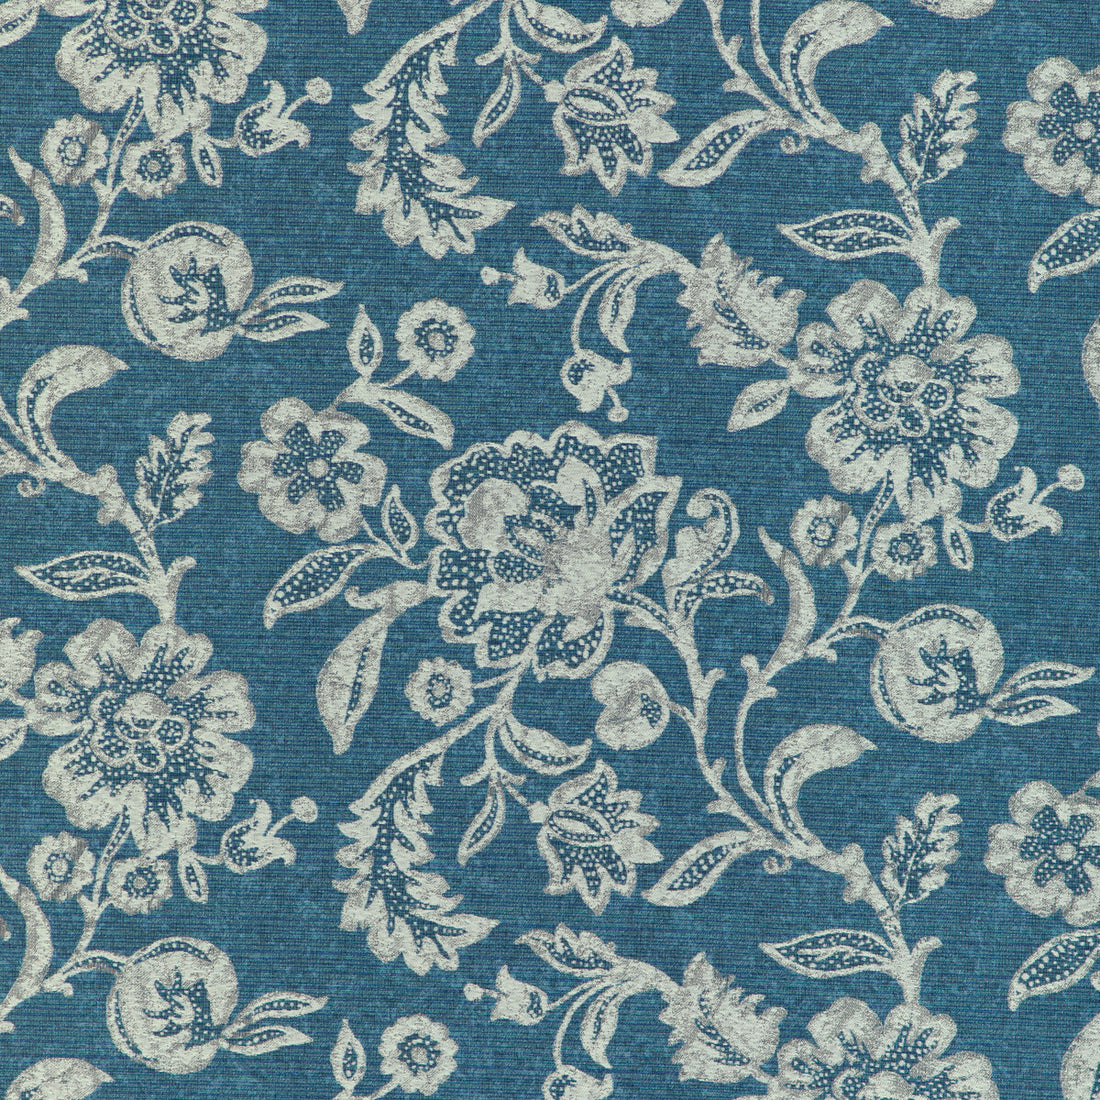 Chesapeake fabric in batik blue color - pattern 37083.5.0 - by Kravet Contract in the Chesapeake collection